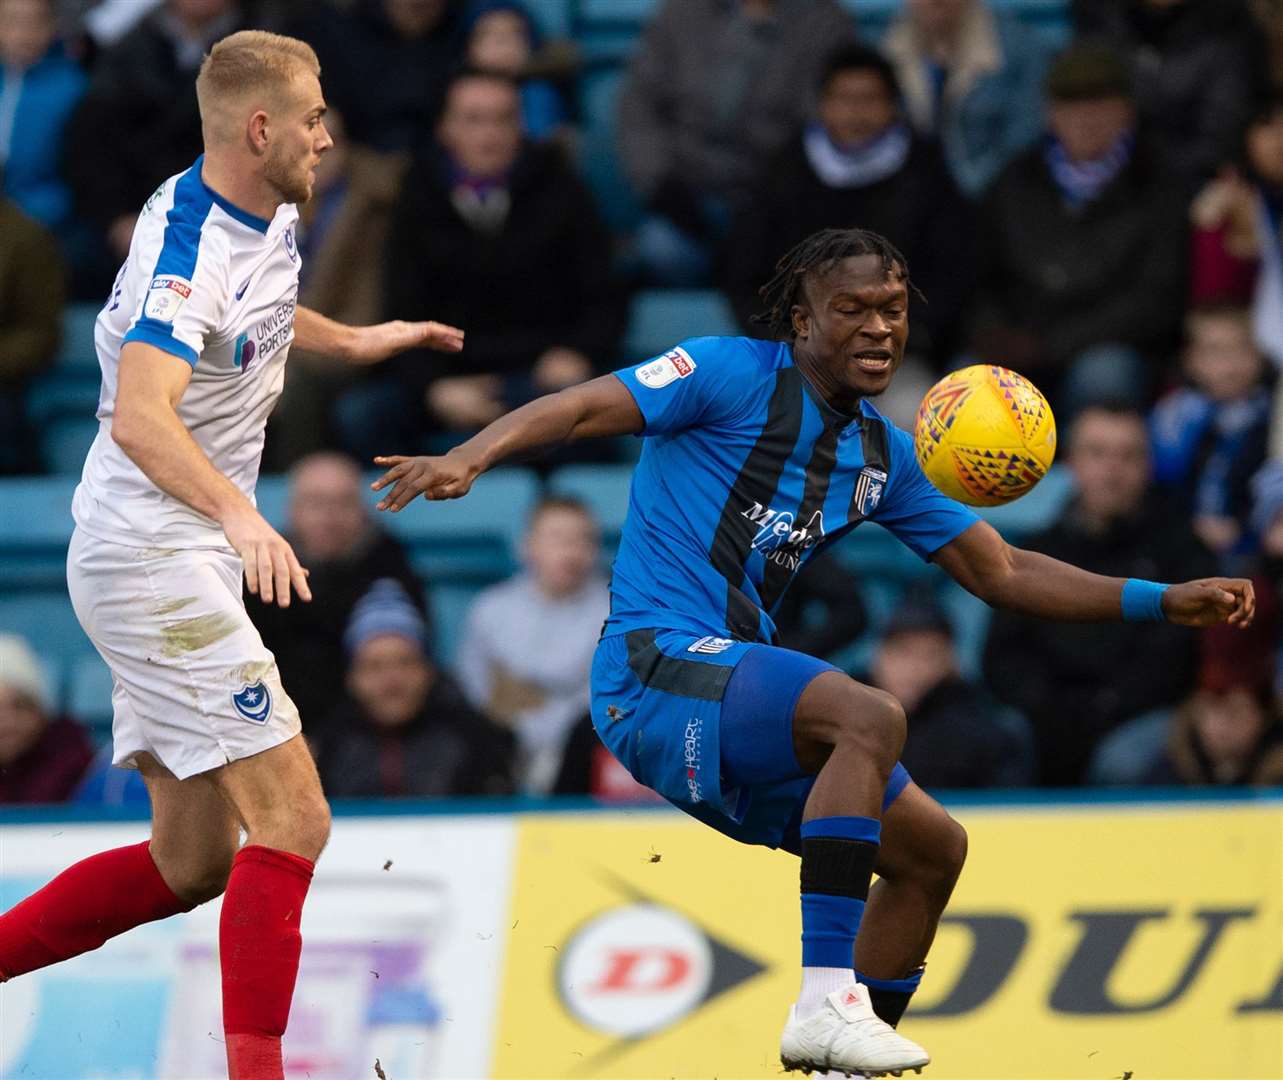 Noel Mbo has found first-team opportunities limited at Priestfield Picture: Ady Kerry